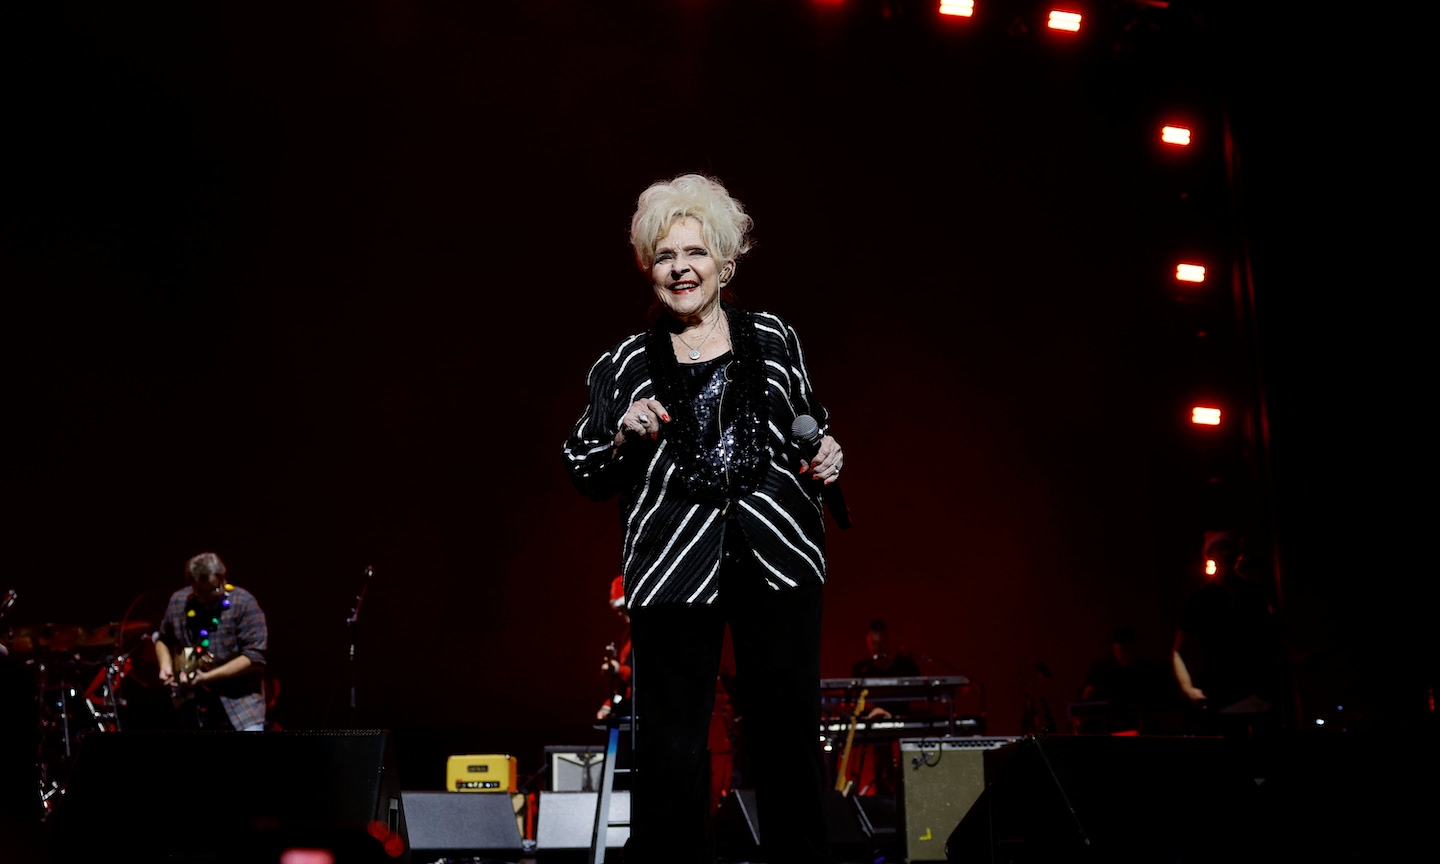 Brenda Lee And Vevo Team Up For ‘Rockin’ Around The Christmas Tree’ Footnotes Episode